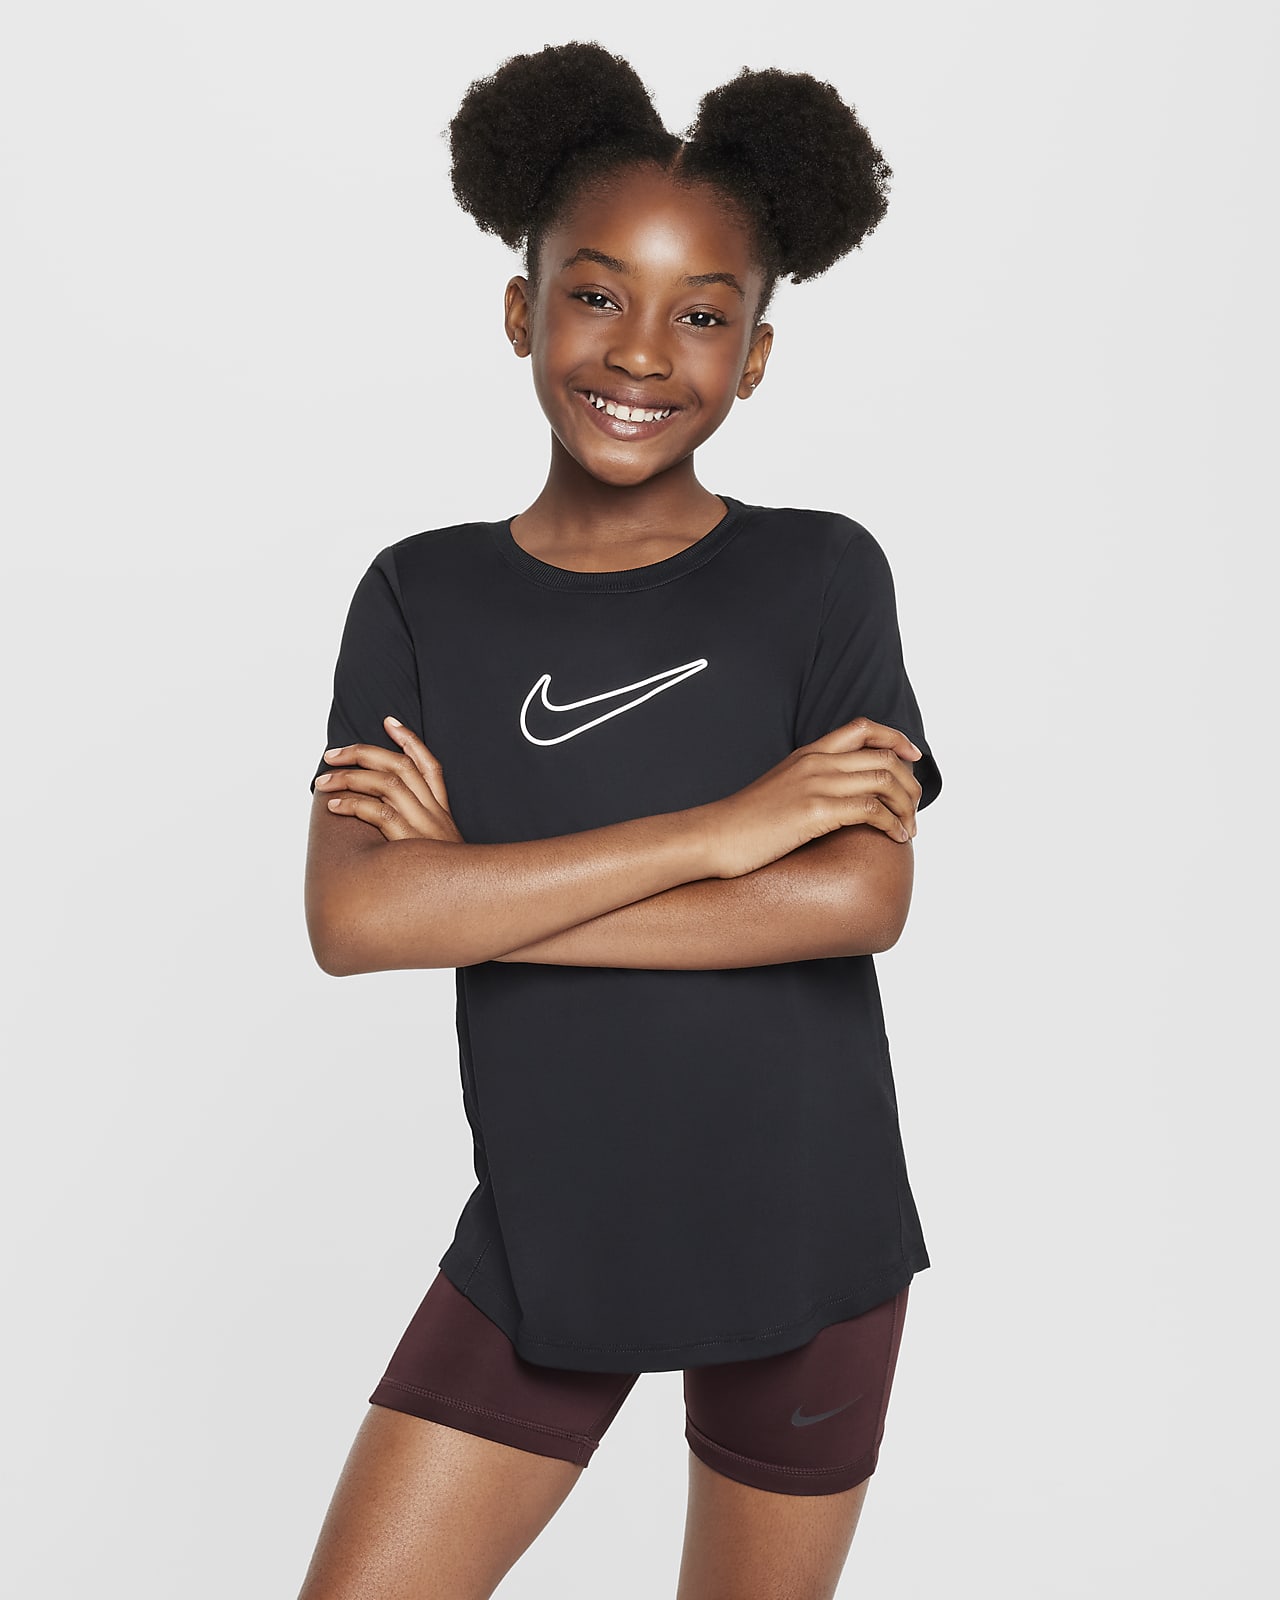 Nike One Fitted Older Kids' (Girls') Dri-FIT Short-Sleeve Top